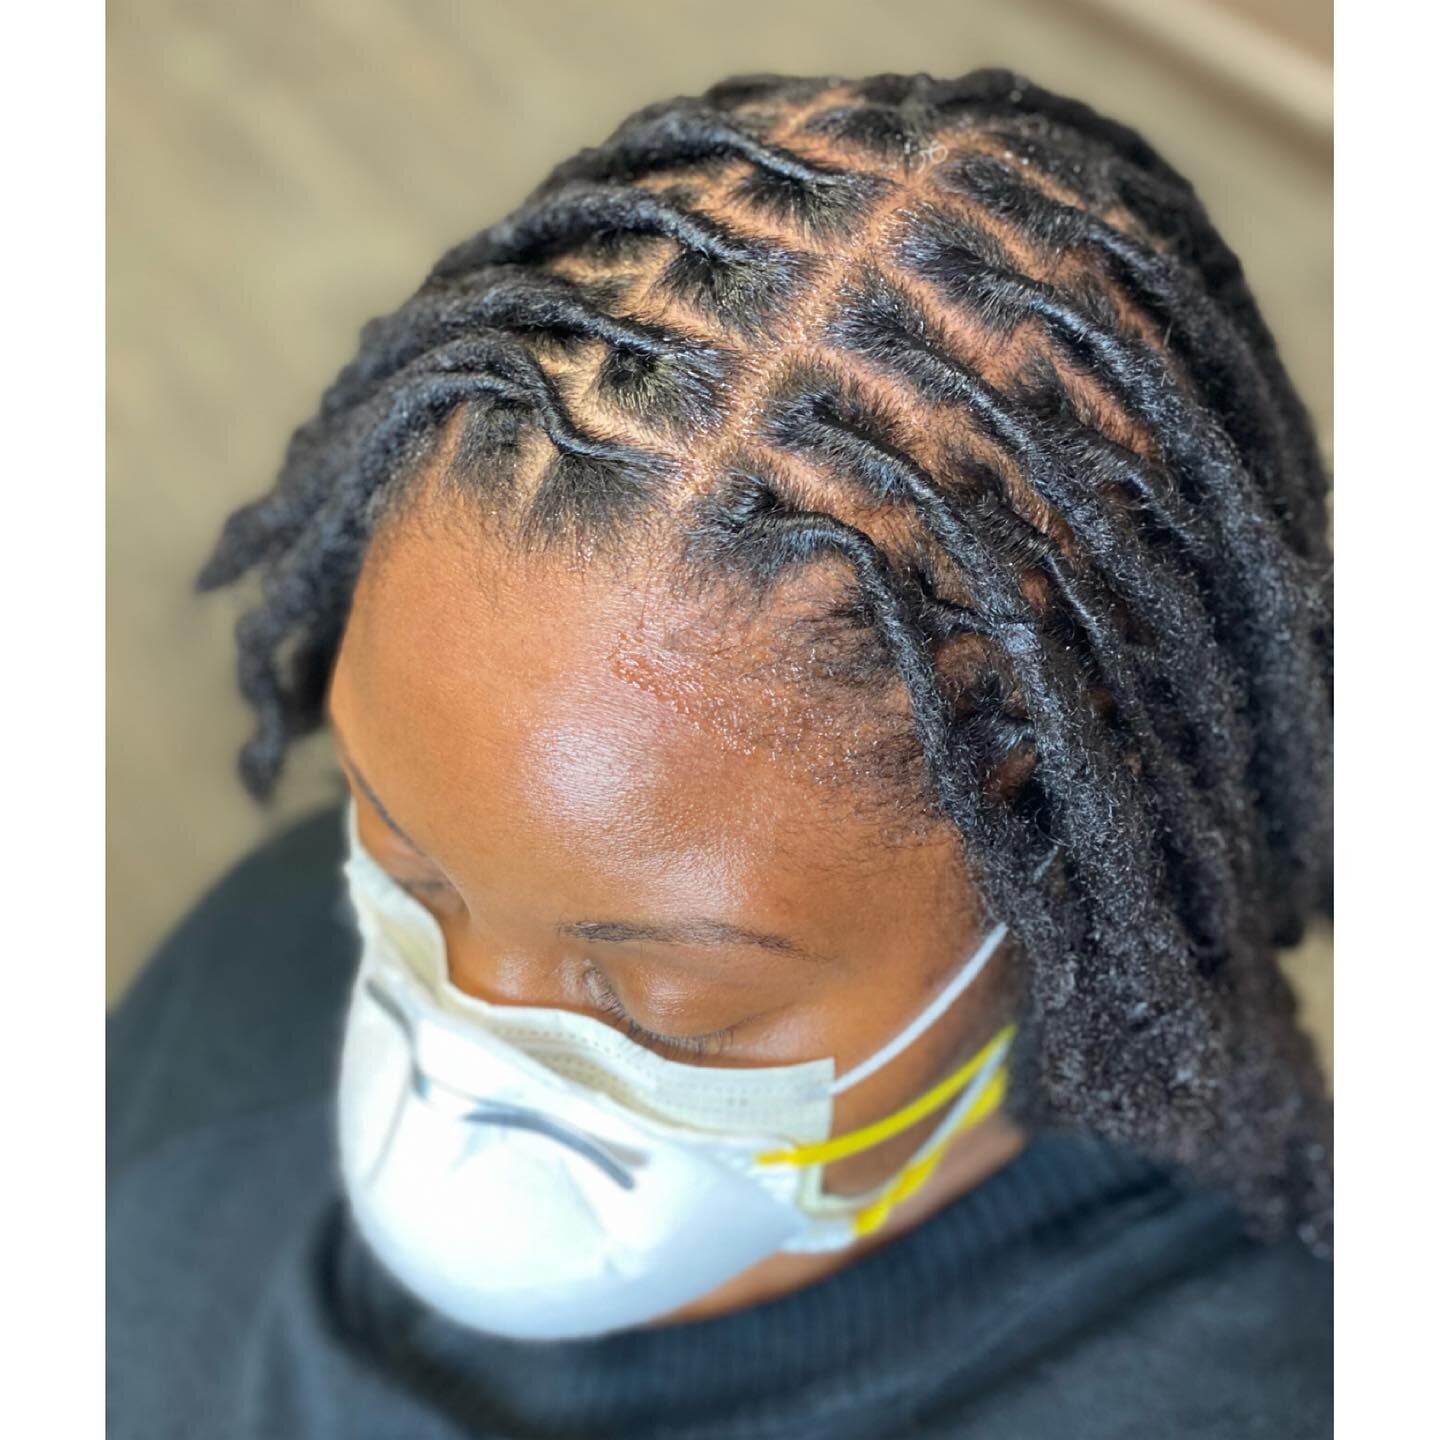 They say Cleanliness is next to godly ness ✨
&bull;
Appointments Available 
&bull;
#loctopianqueens #locmaintenance #boxbraids #crochet #locs #atlantahair #allstarweekend2021 #hair @locmamas #fresh #decaturbraids #naturalhair